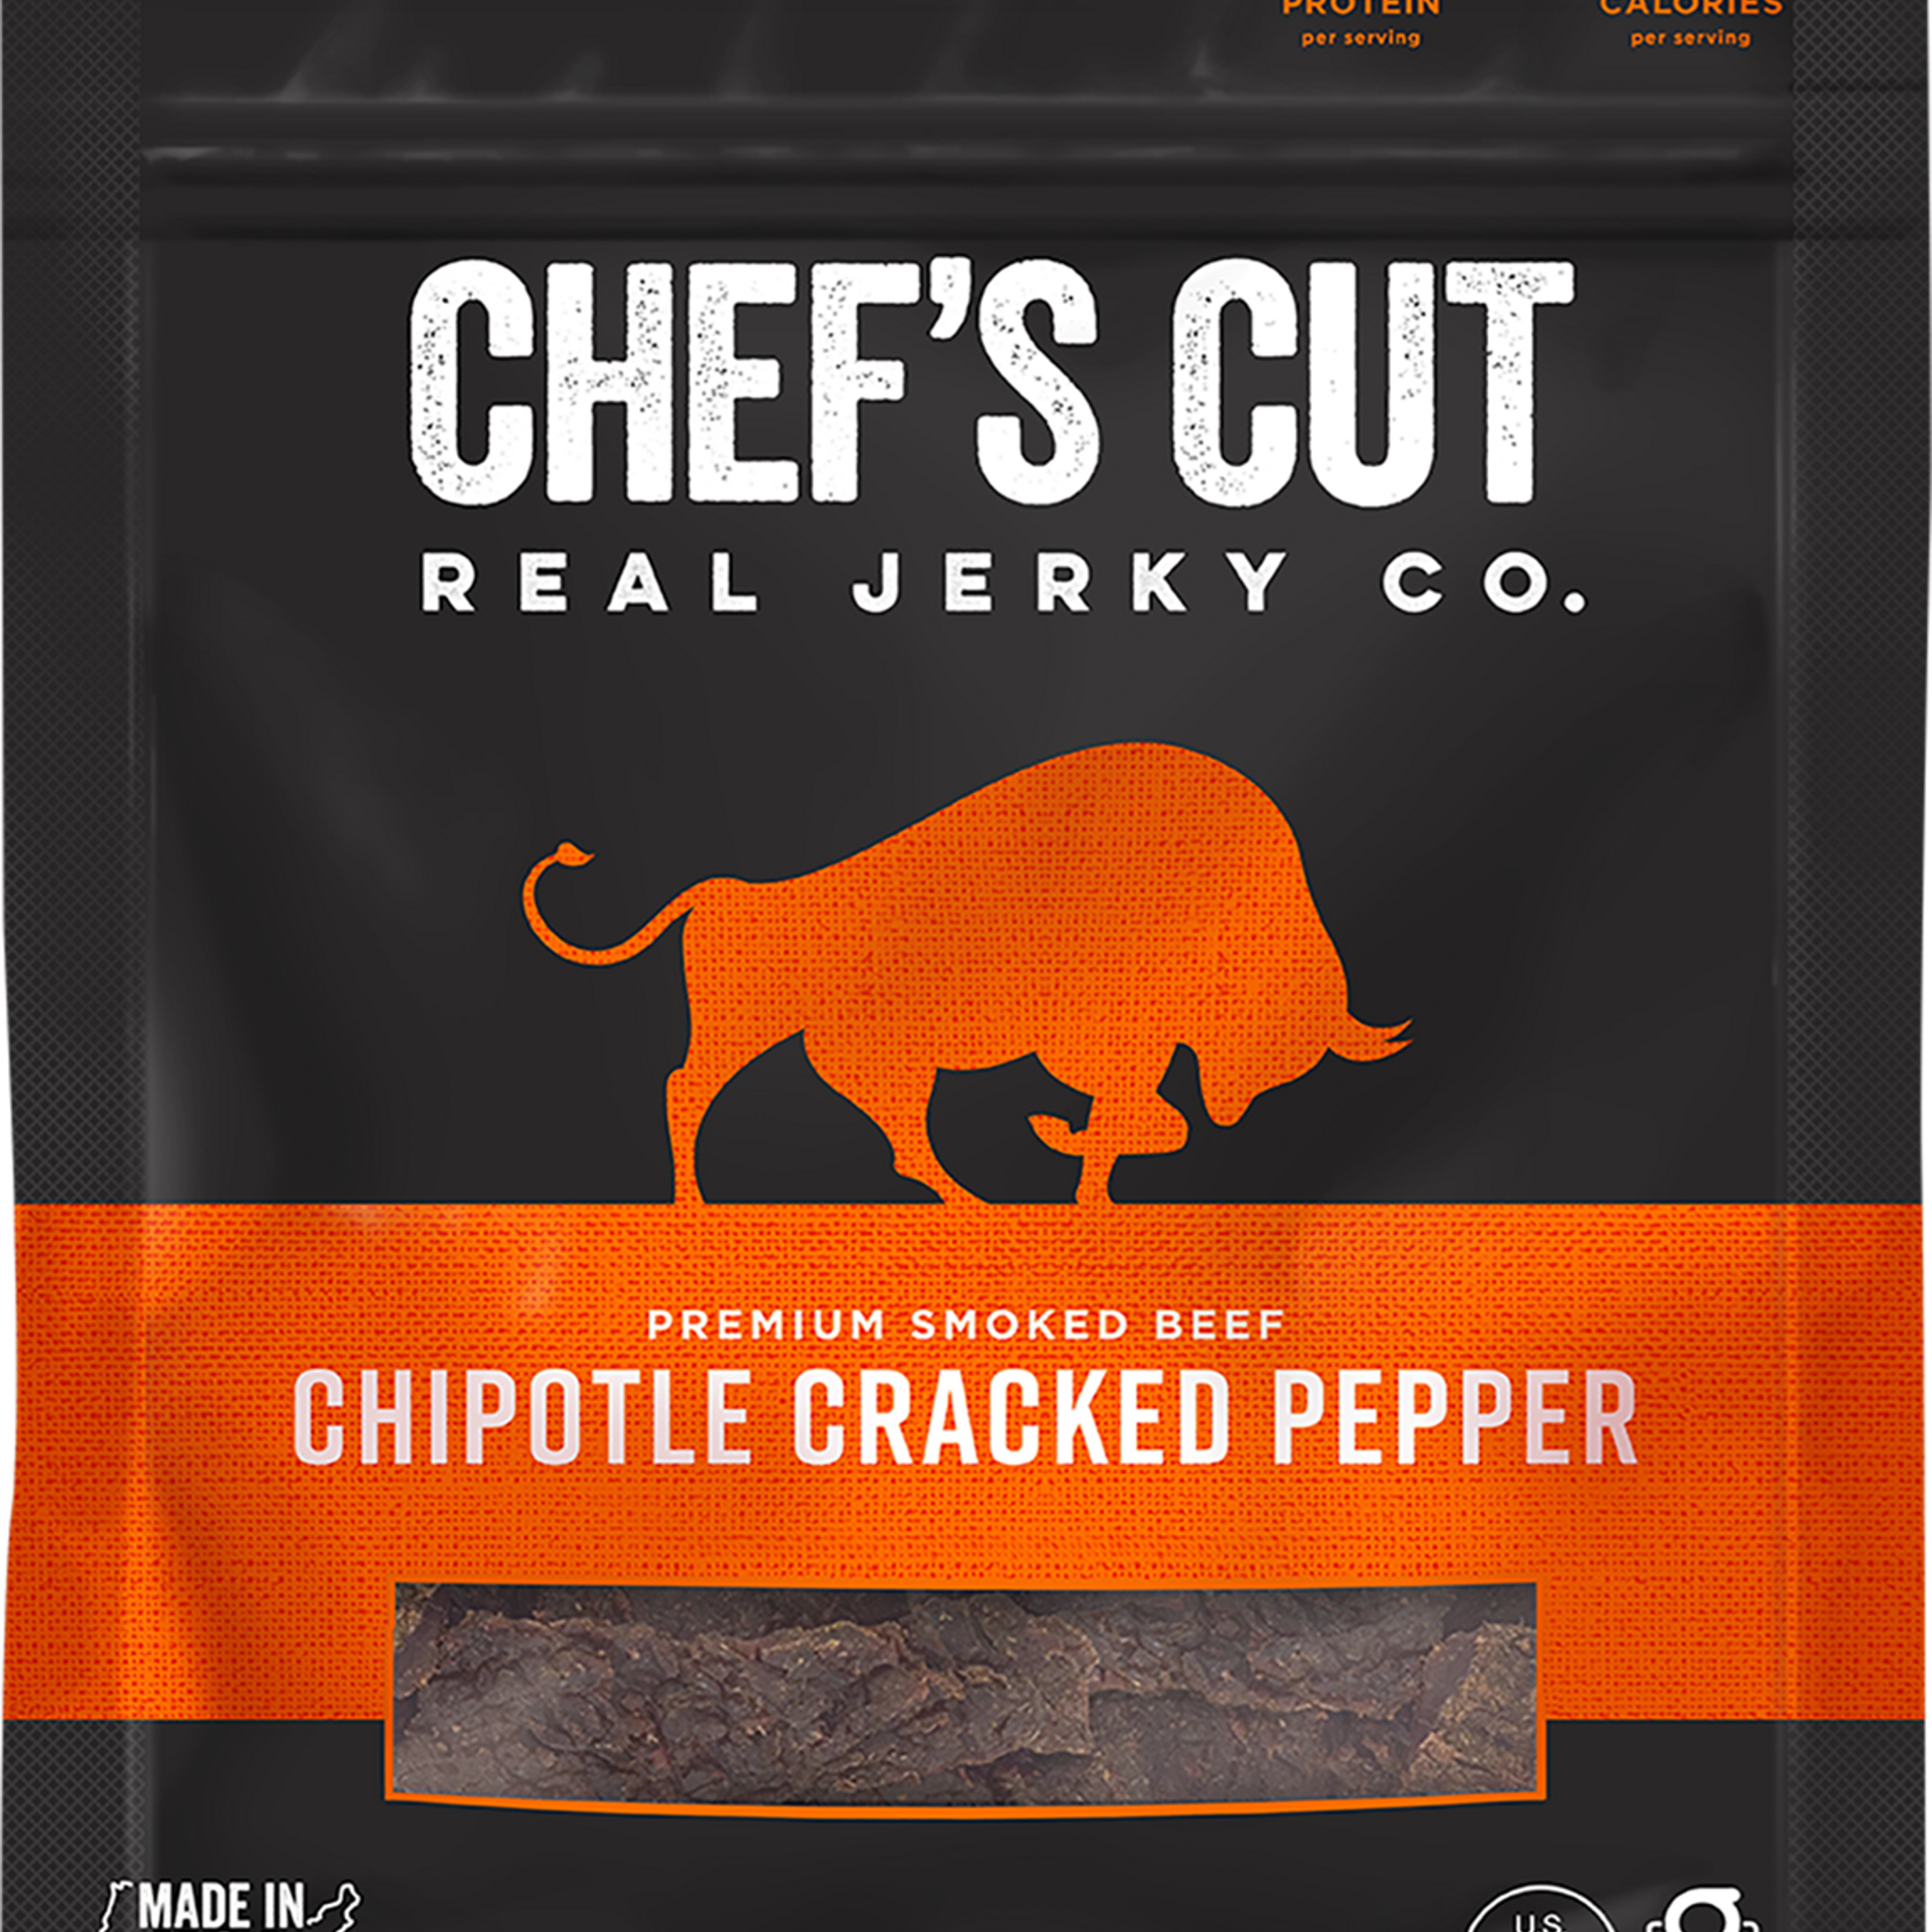 Chipotle Cracked Pepper